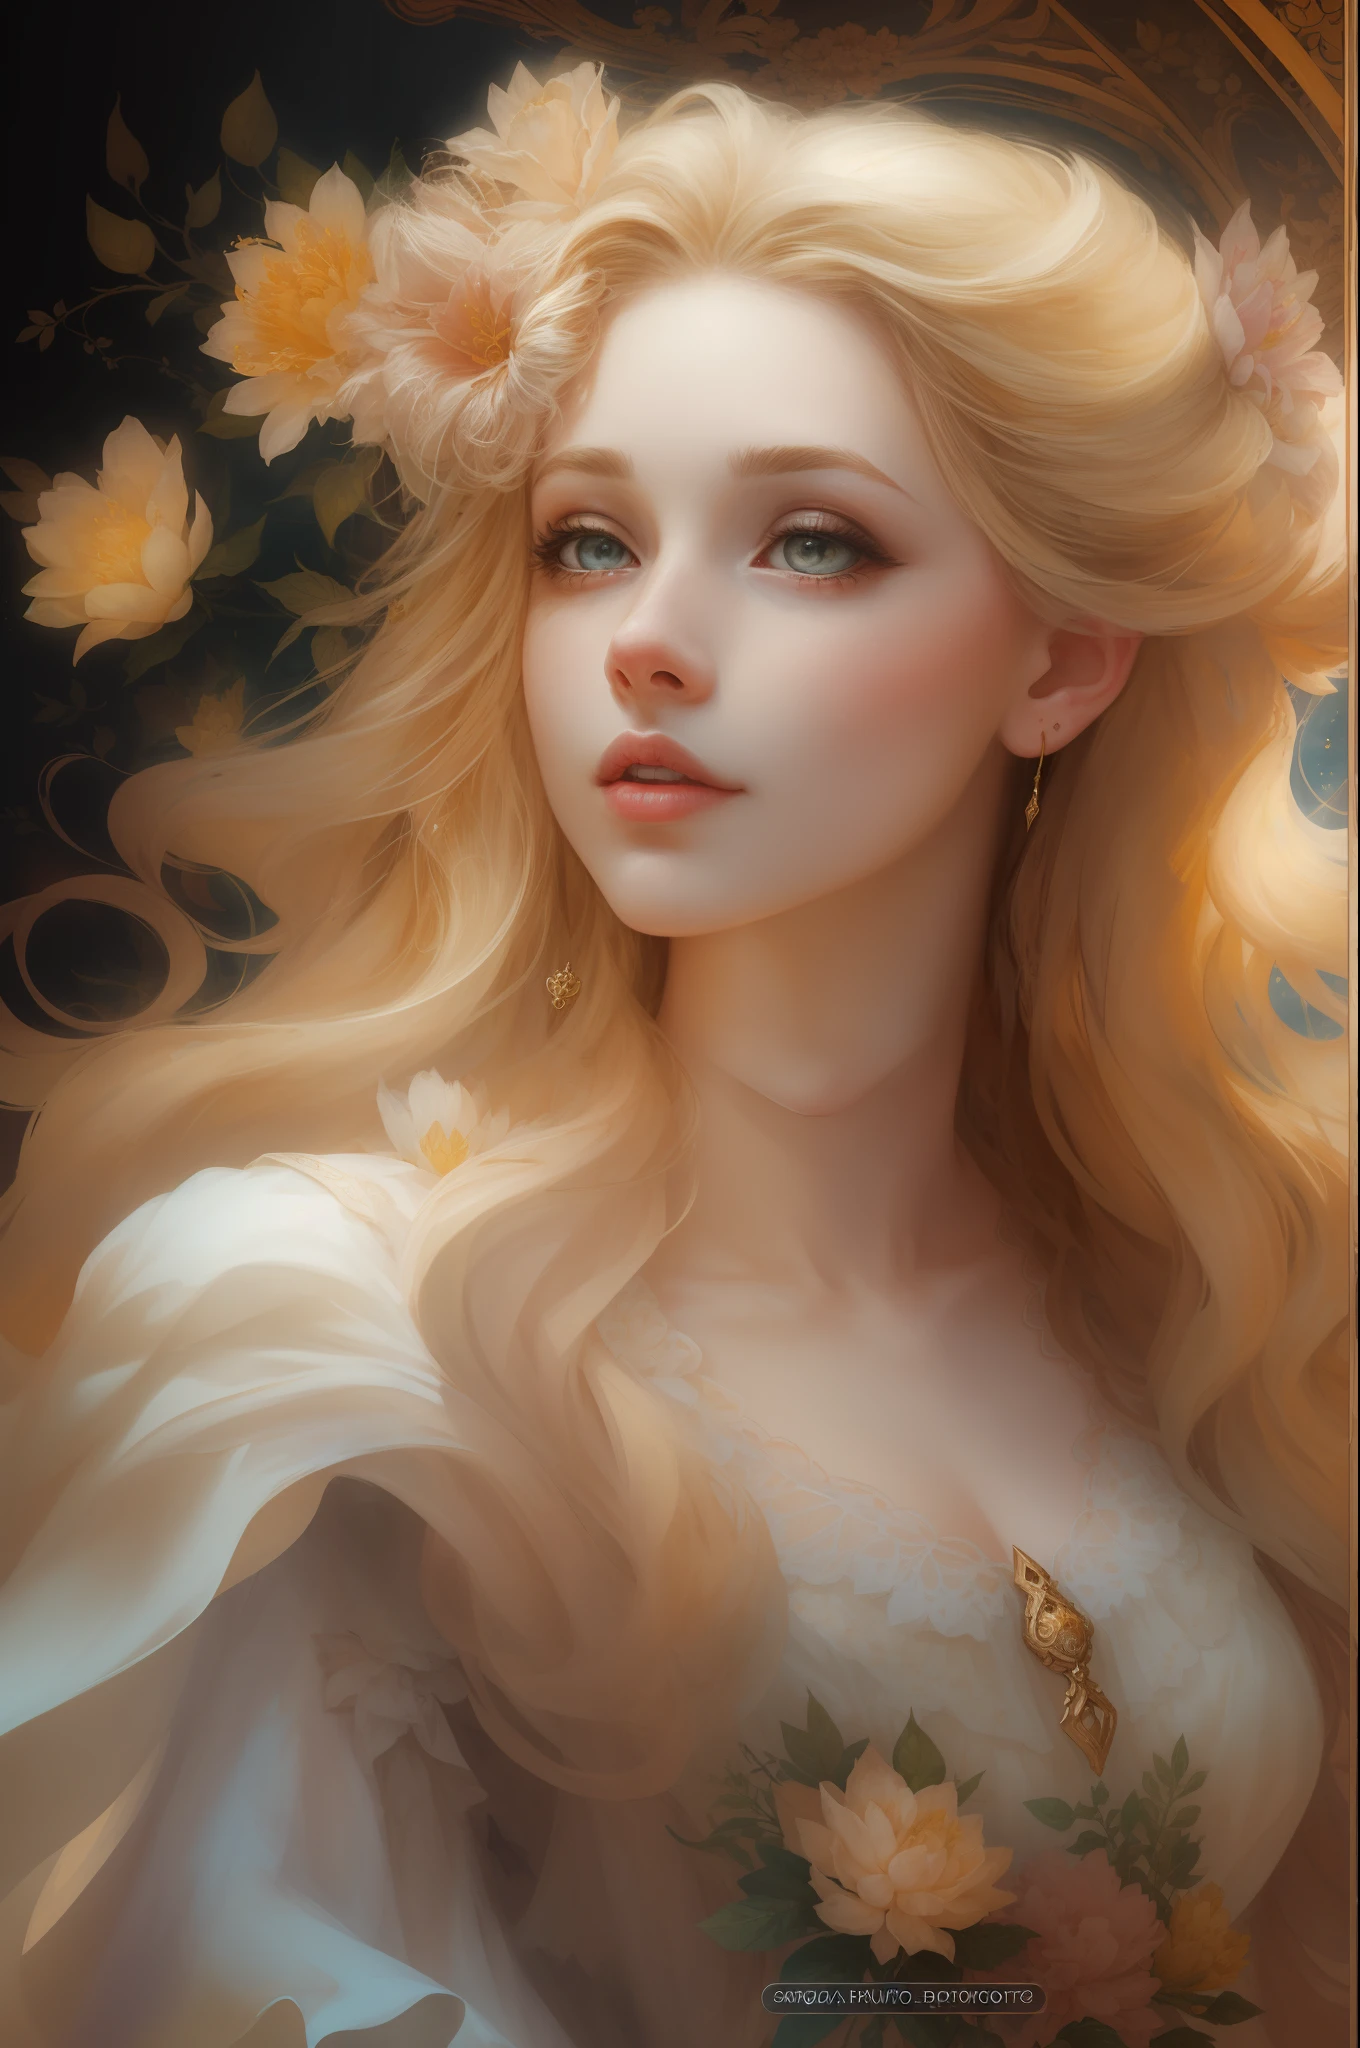 （（Gorgeous 18-year-old princess）），（She has long flowing blonde hair），（Bright and beautiful eyes），trendding on artstation，Flowers of Hope by Jean-Honor Fragonard，Peter Mohrbacher，ultra-detailliert，insanely details, Amazing, complex, elite, Art Nouveau, a gorgeous, Liquid wax, elegant, Luxurious, greg rutkovsky, Ink style, a sticker, Vector art beautiful character design, Dual exposure shooting, Luminous design, winning artwork, tmasterpiece, AMOLED black background,optic